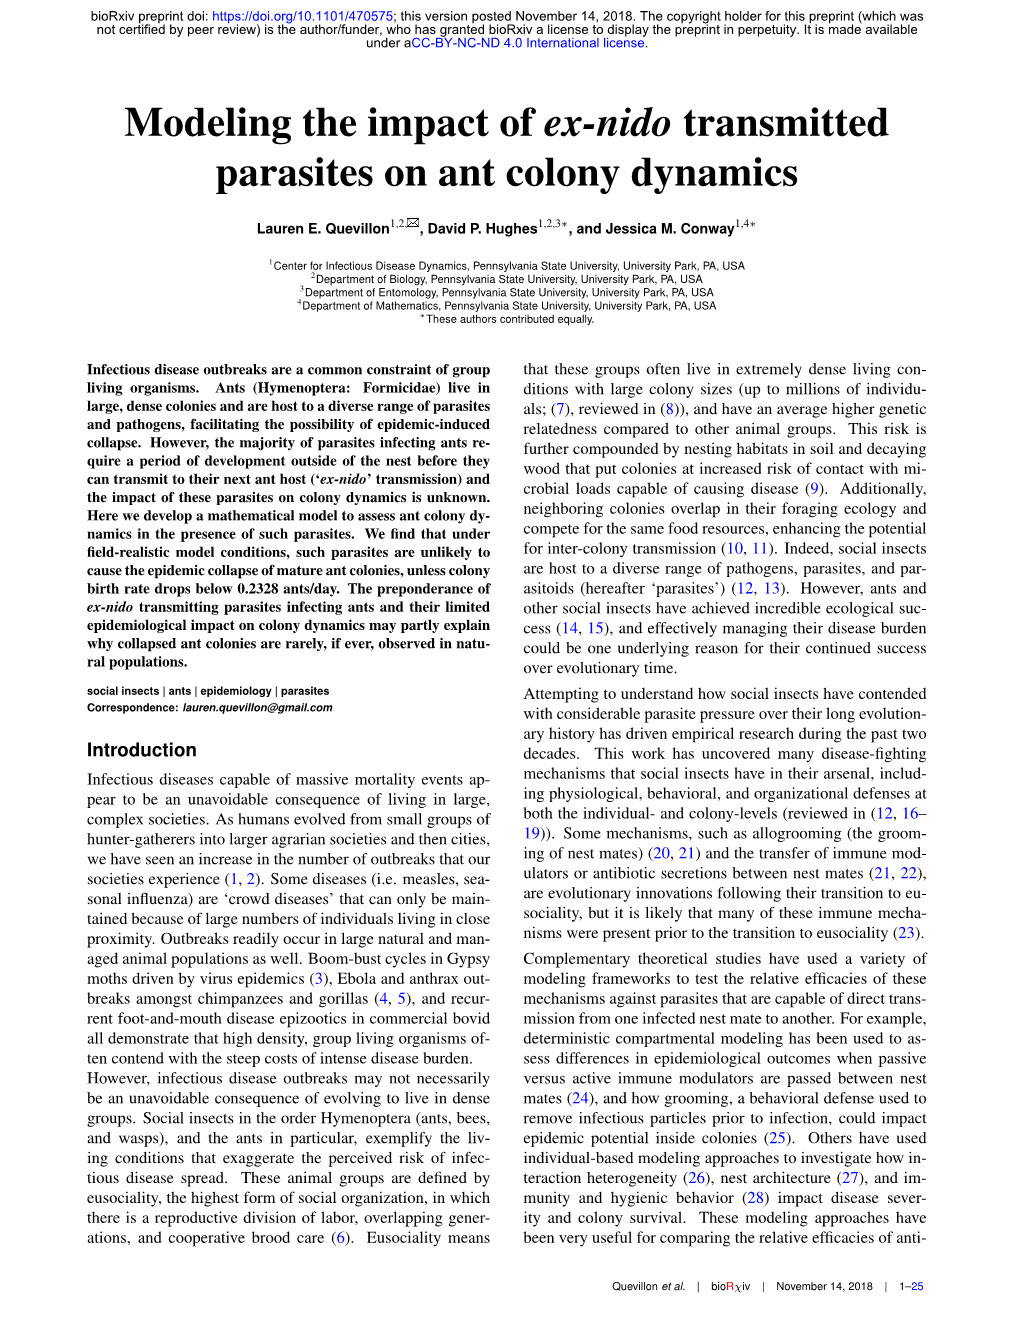 Modeling the Impact of Ex-Nido Transmitted Parasites on Ant Colony Dynamics